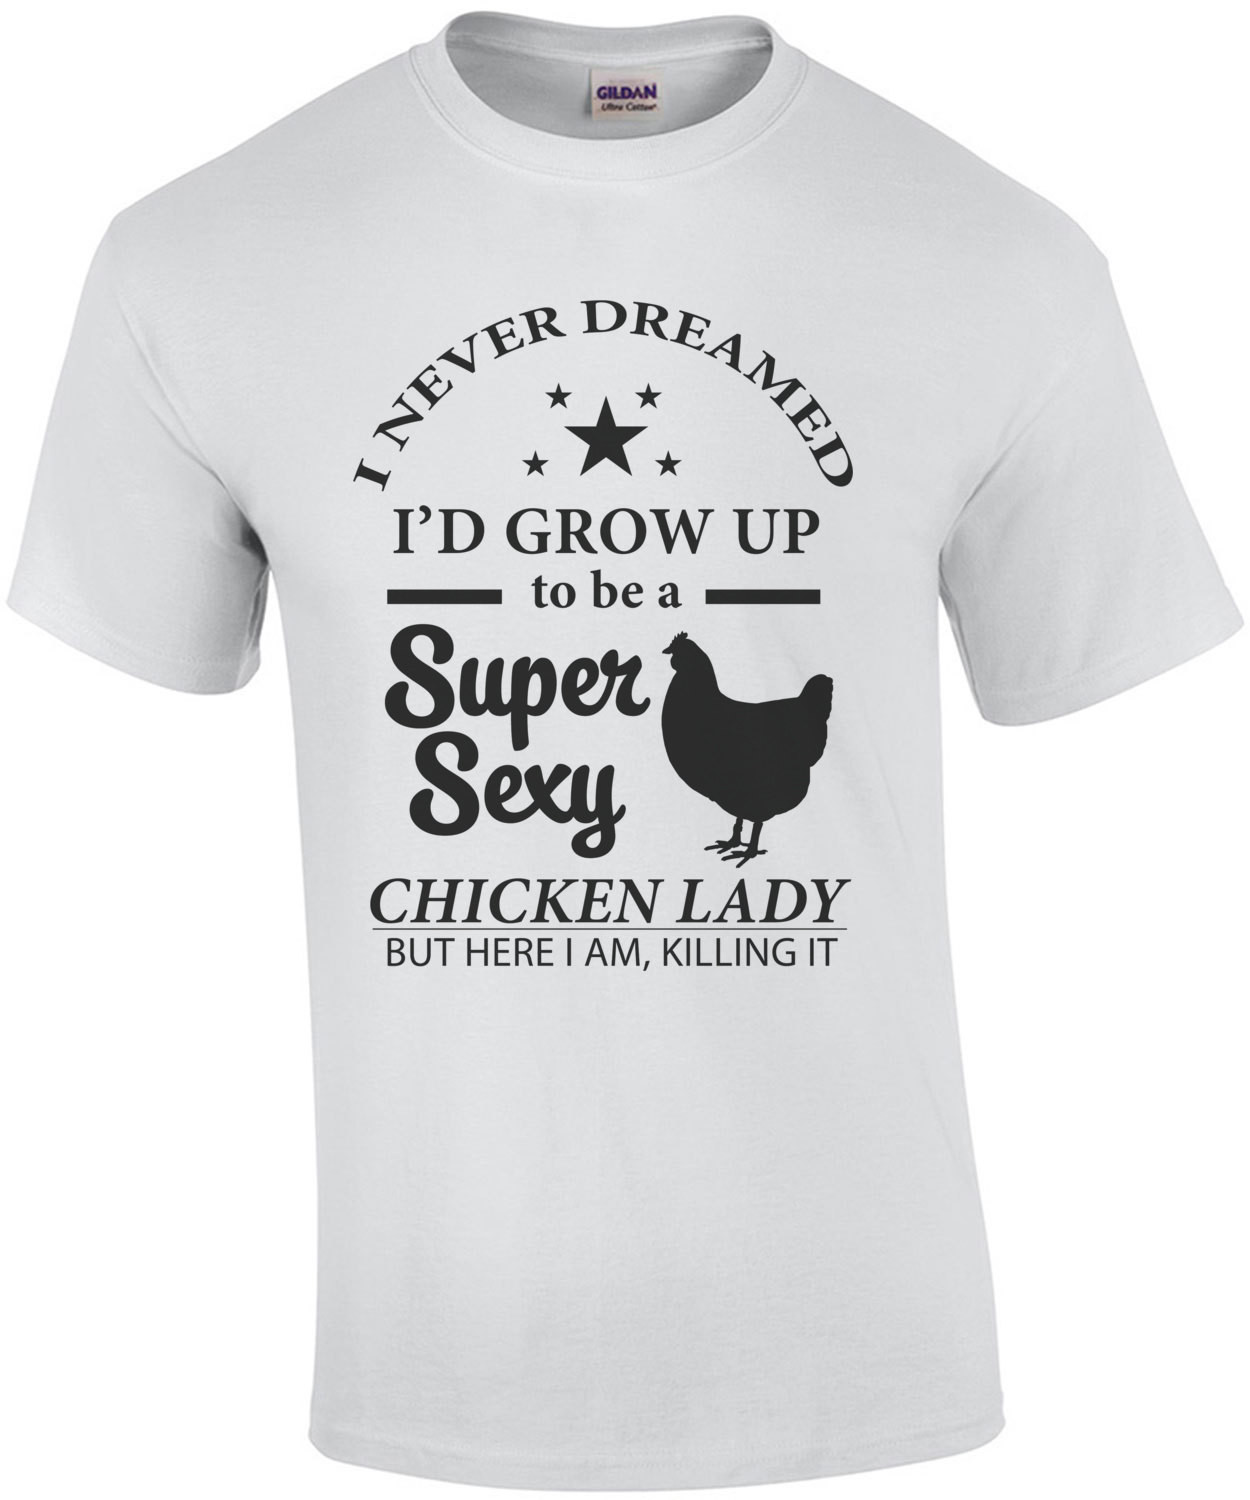 I never dreamed I'd grow up to be a super sexy chicken lady but here I am killing it. Funny T-Shirt